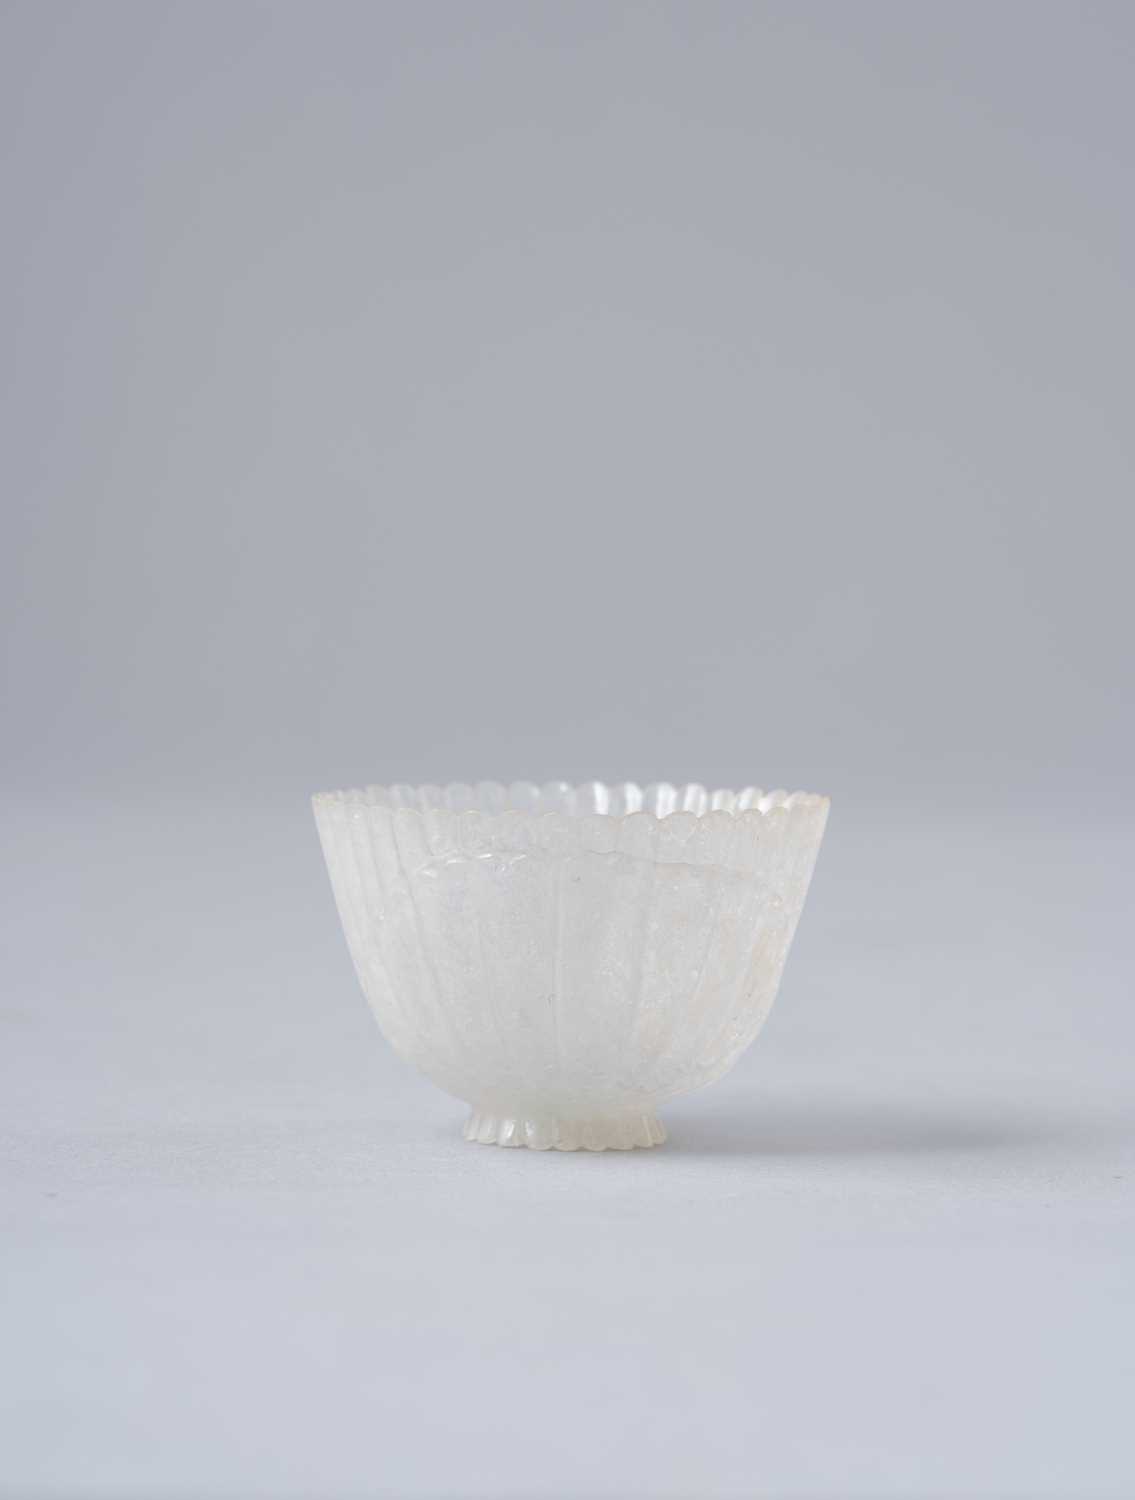 A RARE MINIATURE WHITE JADEITE MUGHAL-STYLE CUP 18TH/19TH CENTURY Finely carved as a chrysanthemum - Image 2 of 2